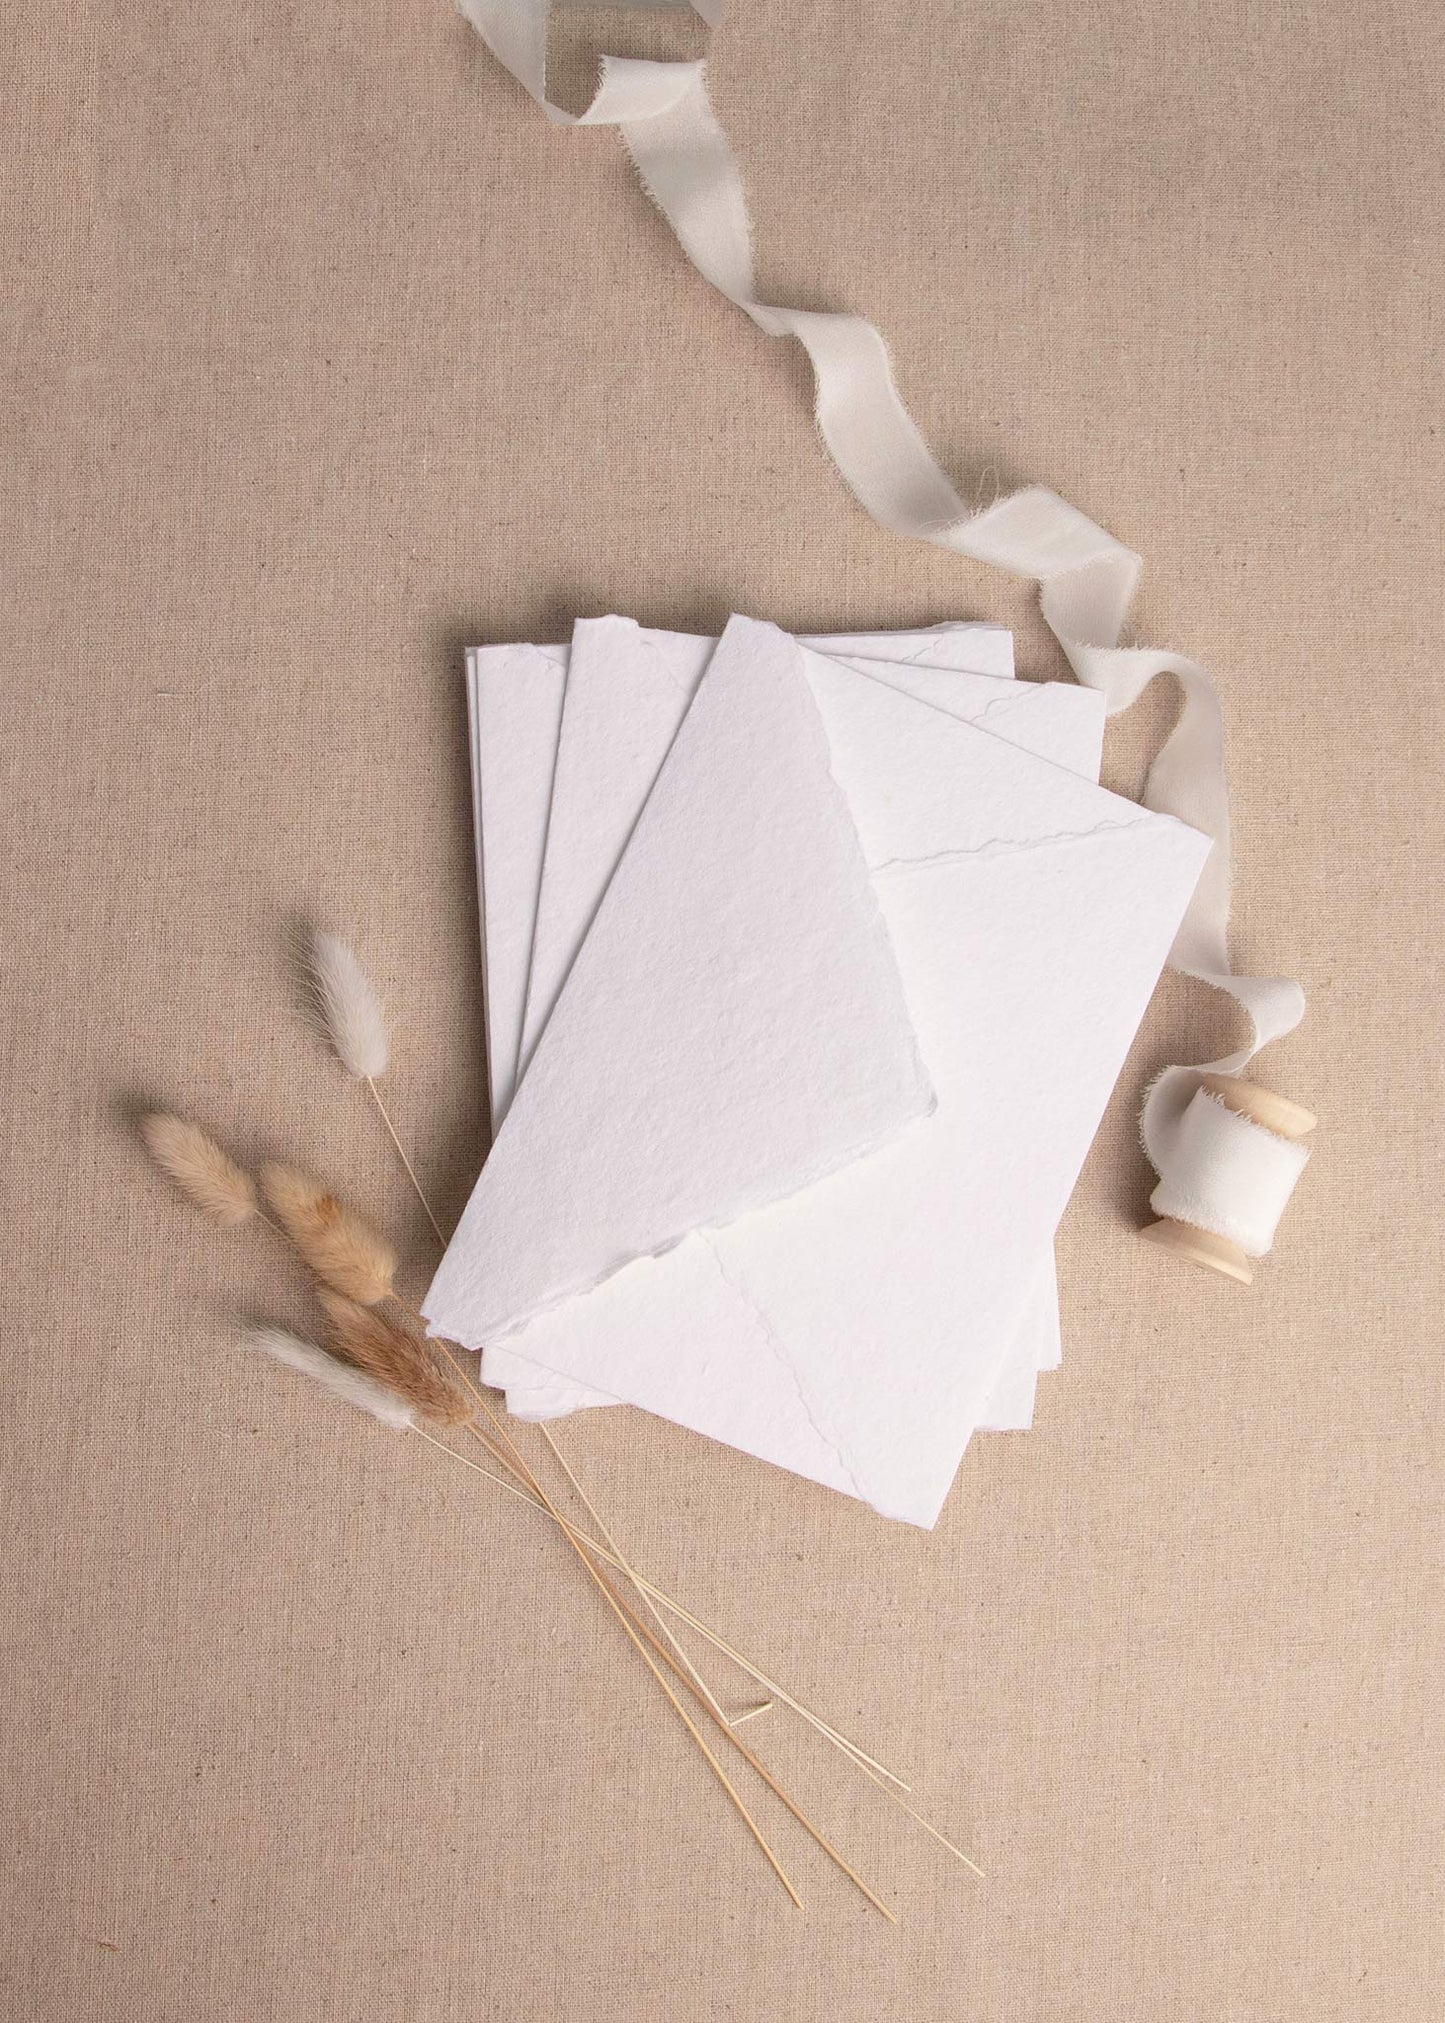 Fanned pile of White handmade paper with deckle edge surrounded by dried flowers and white silk ribbon spool